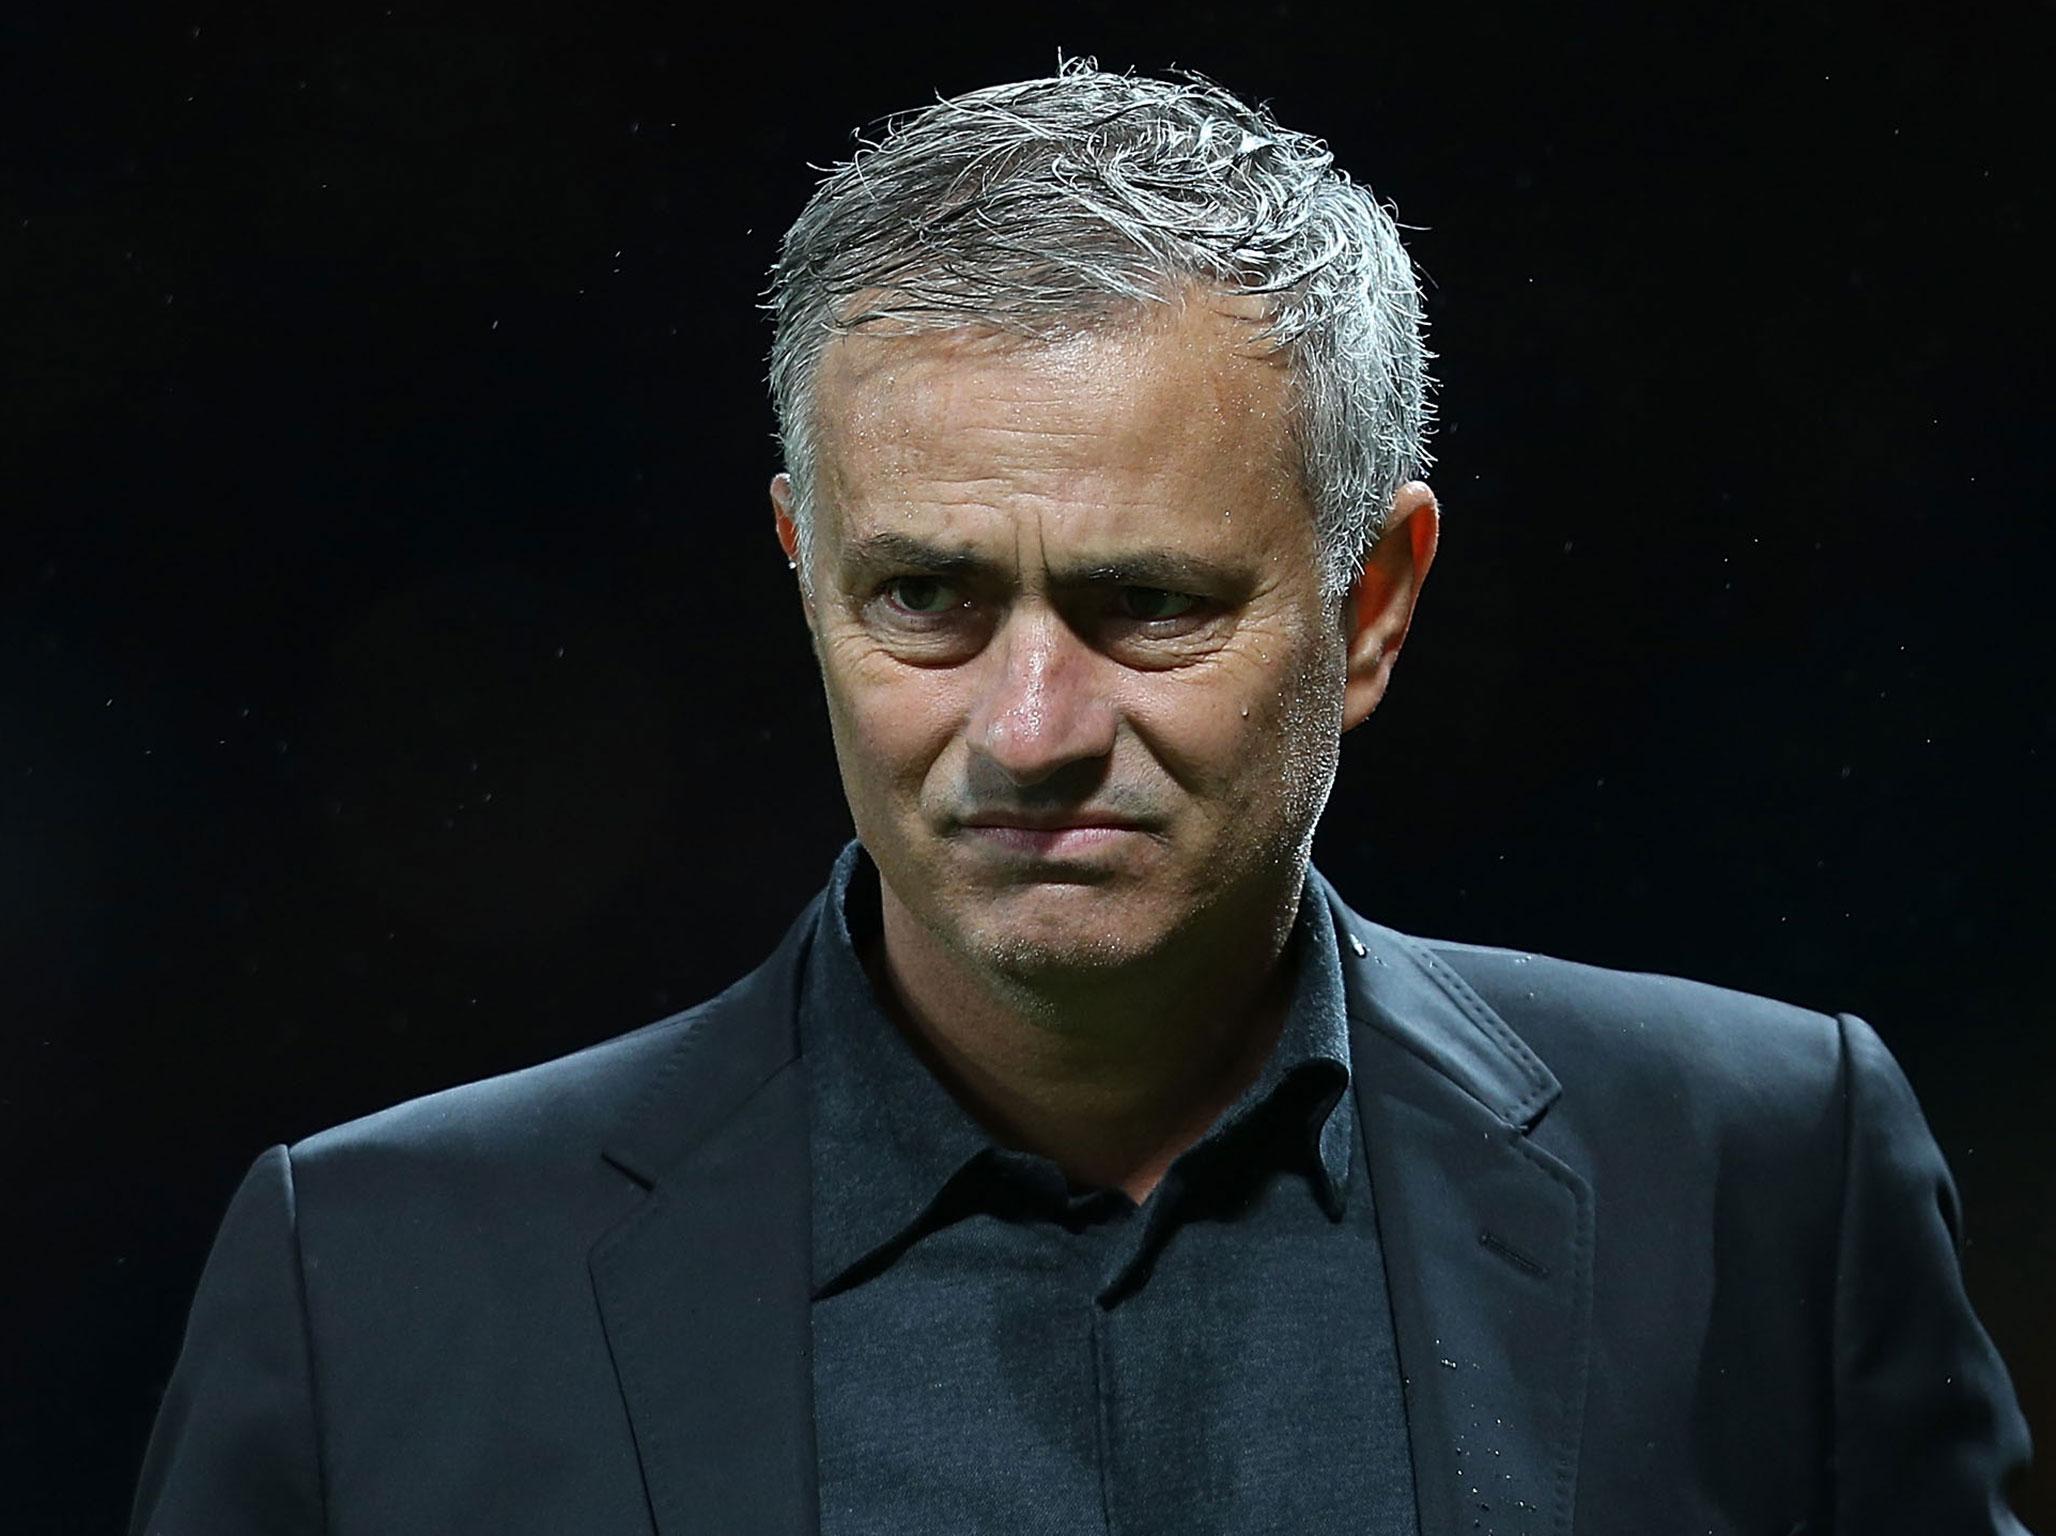 Jose Mourinho wasn't entirely pleased with Manchester United's performance